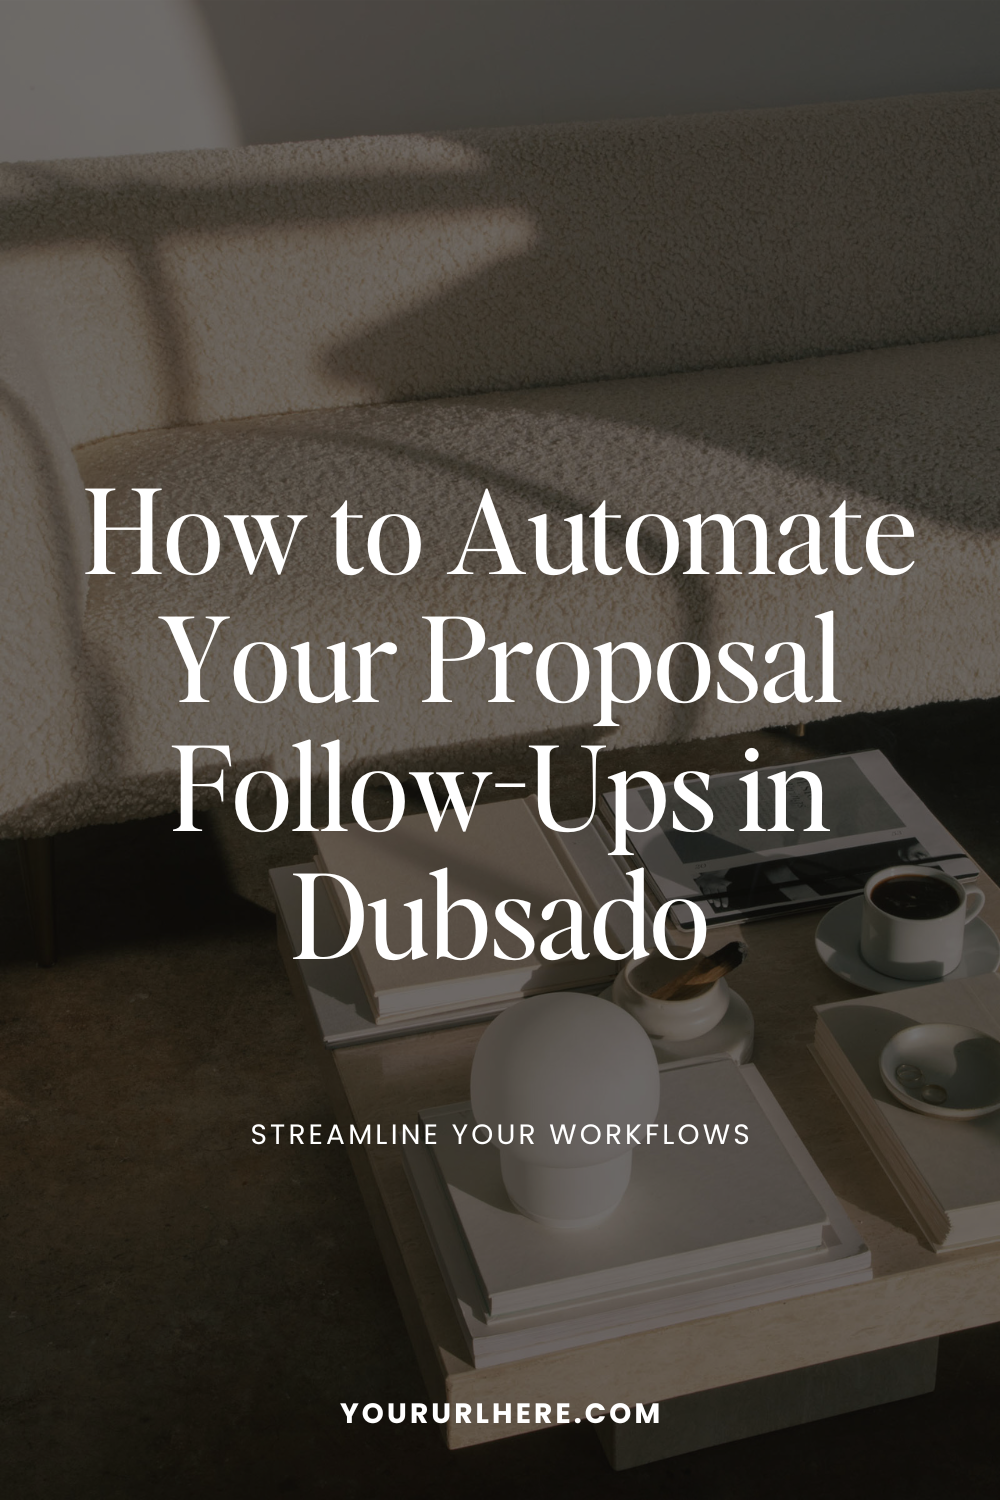 How to Automate Your Proposal Follow-Ups in Dubsado